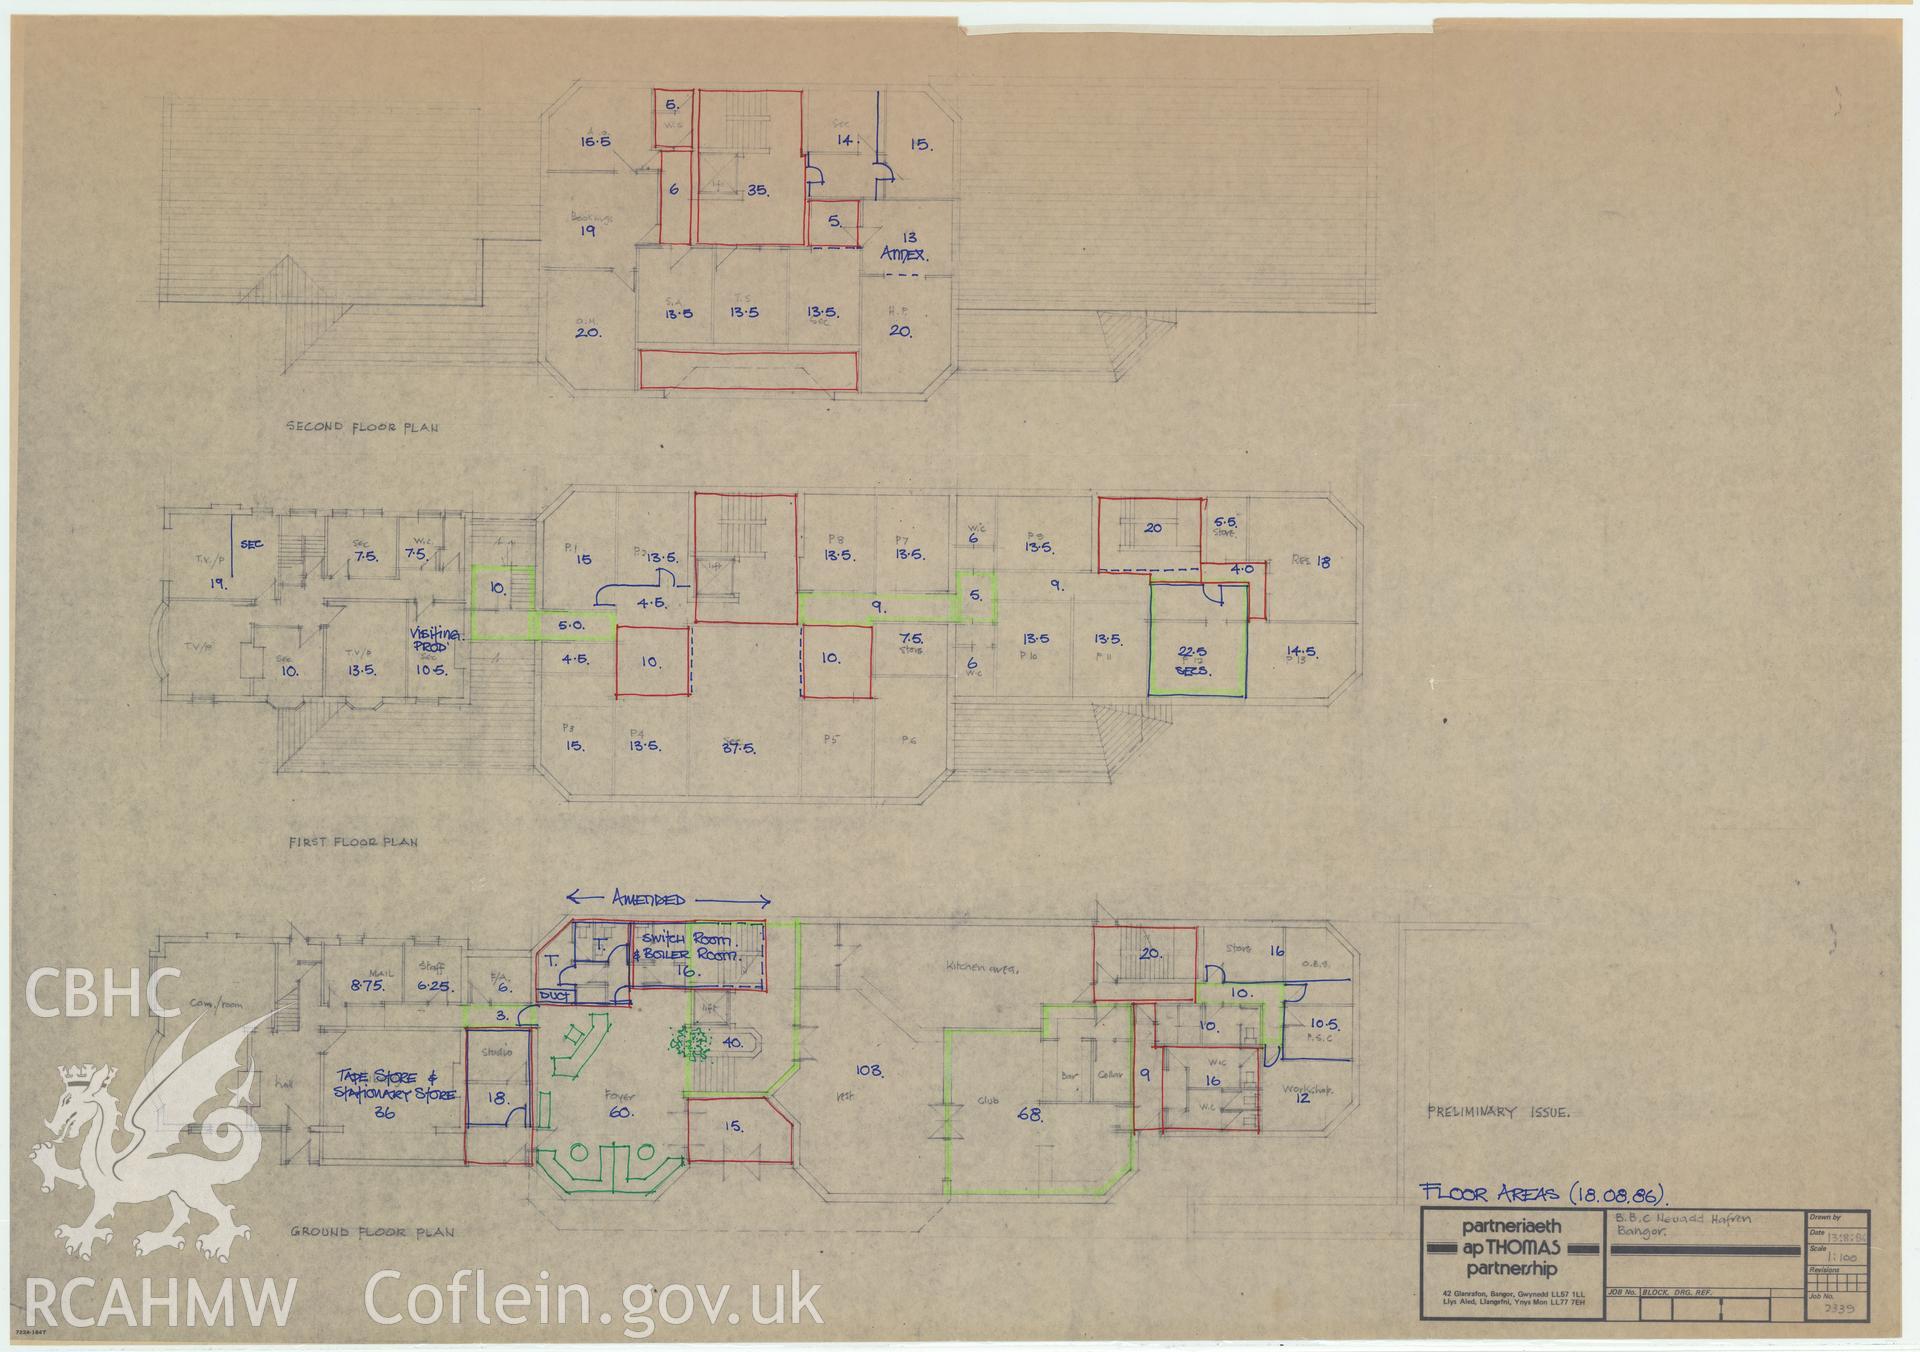 BBC premises, Broadcasting House, Bangor - drawing of floor plans at Neuadd Hafren. Drawing No. 2339. August 1986.